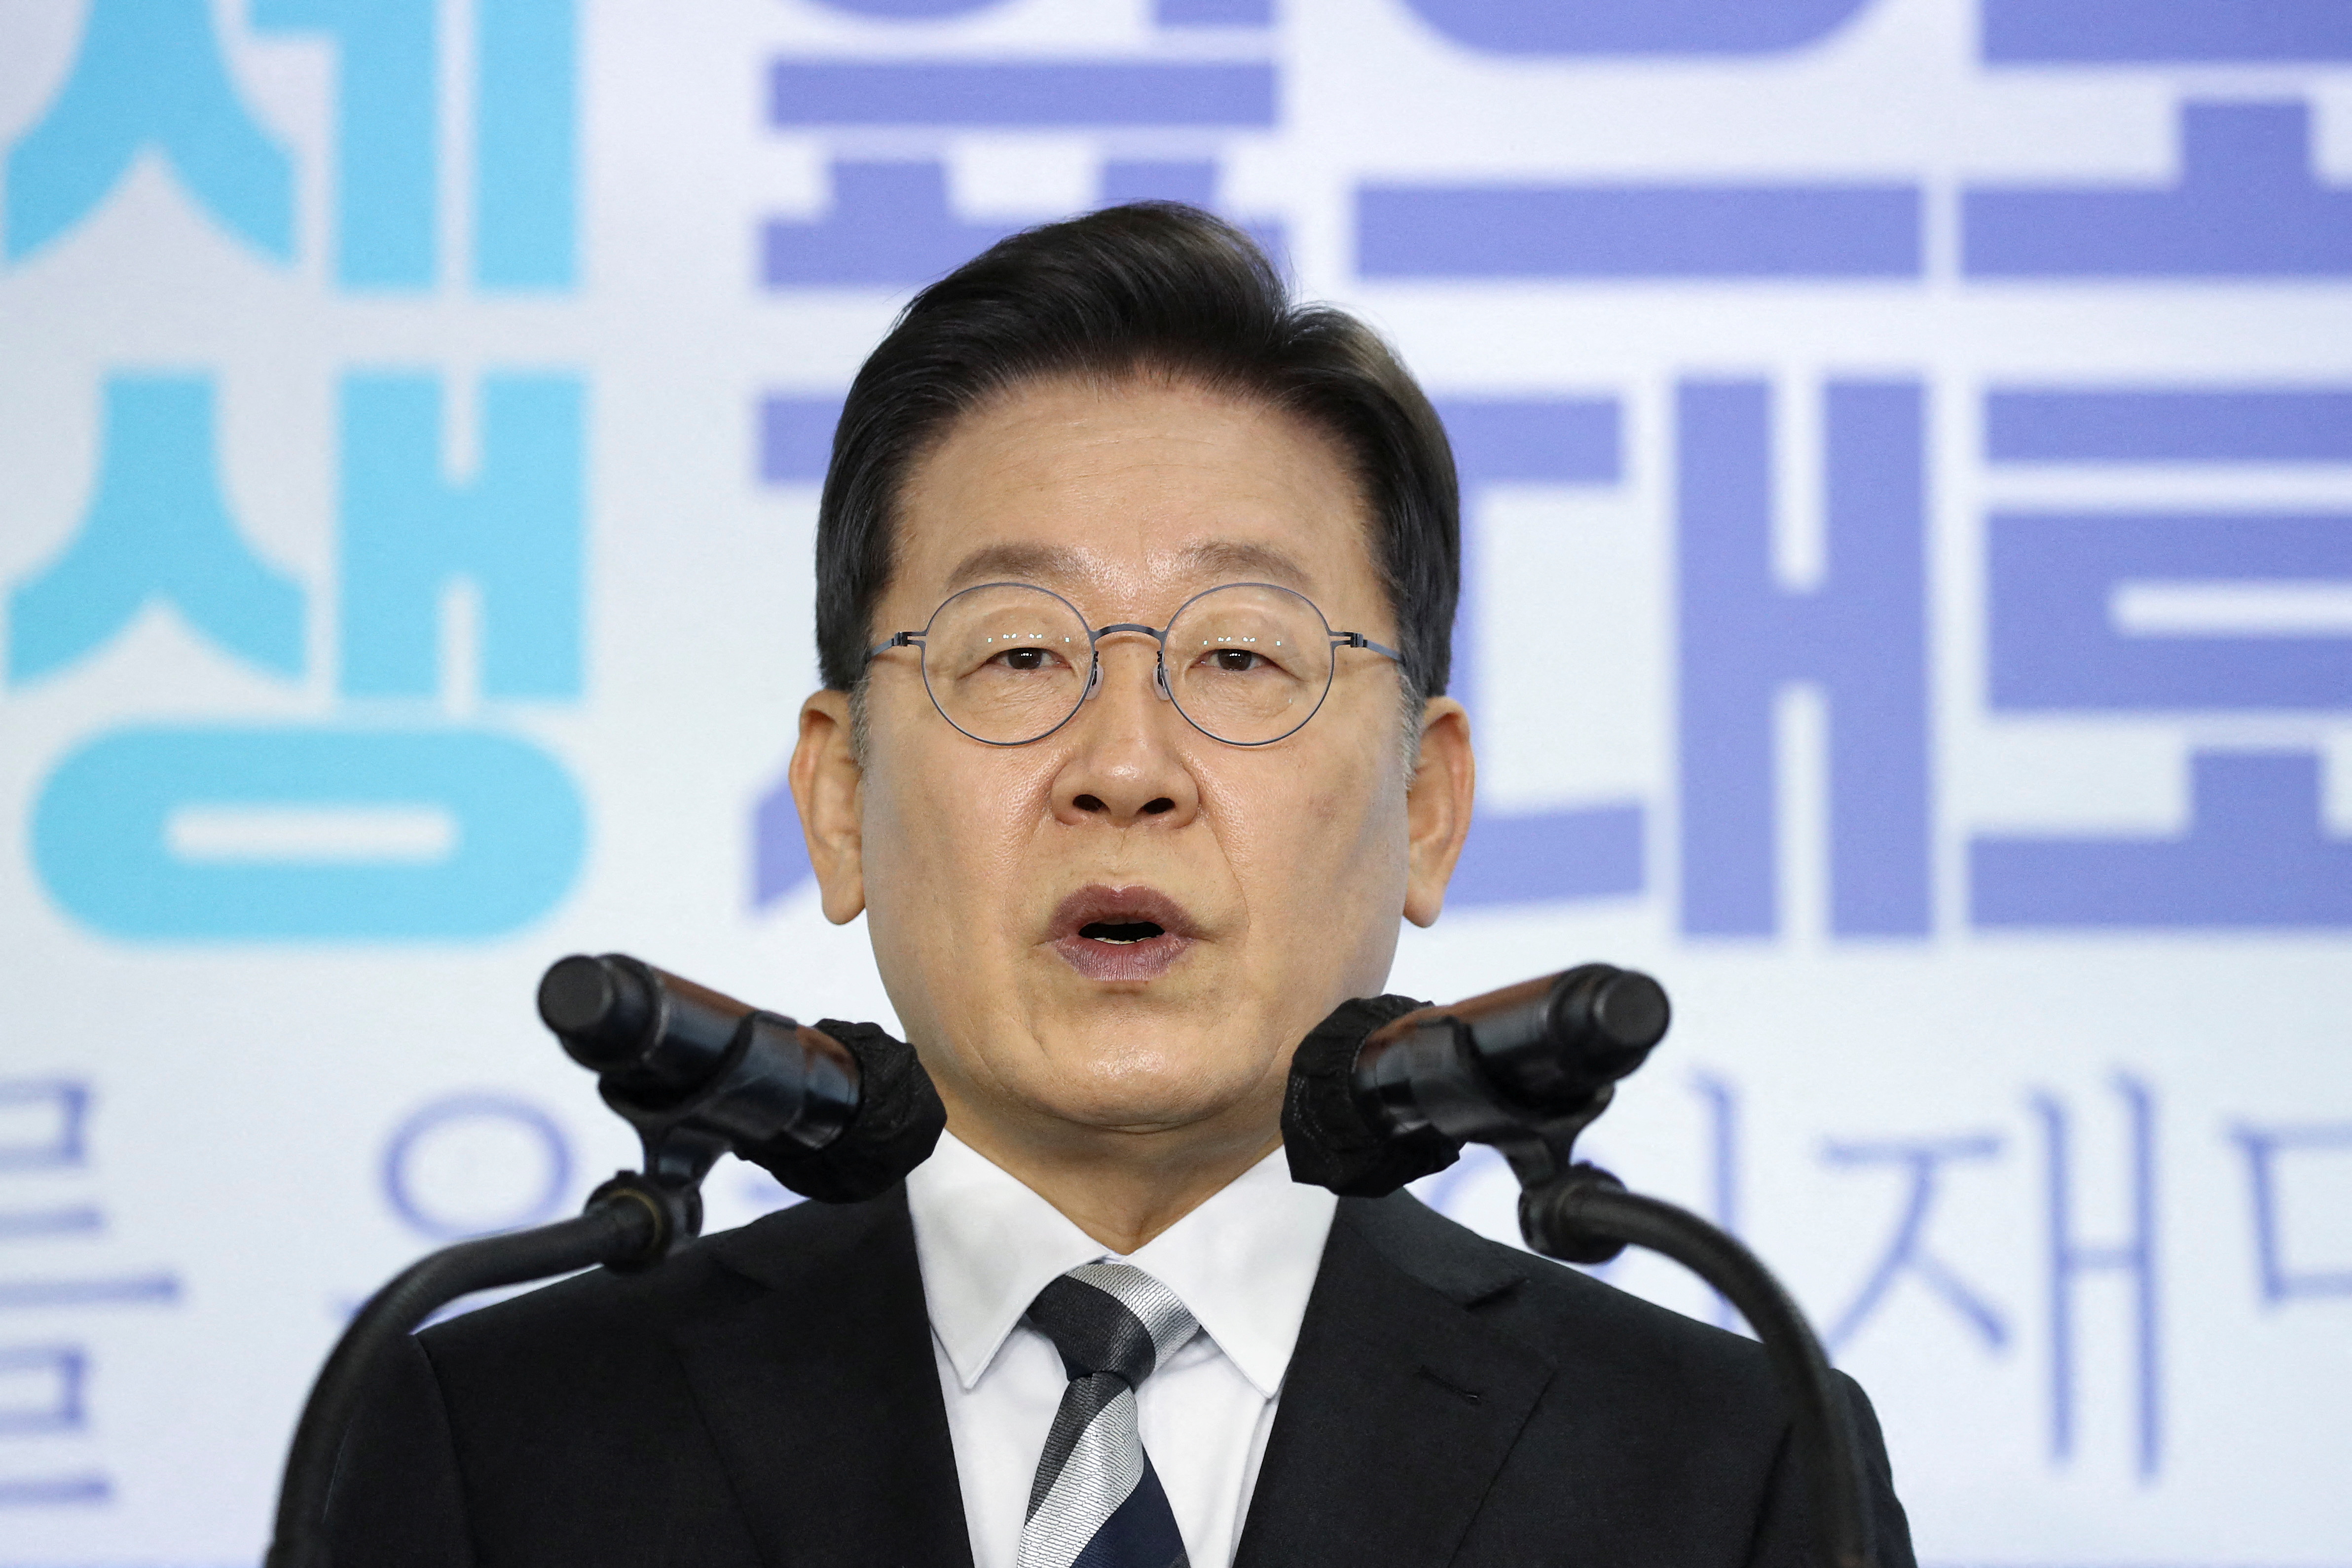 South Korea's ruling party presidential candidate Lee Jae-myung holds New Year's news conference